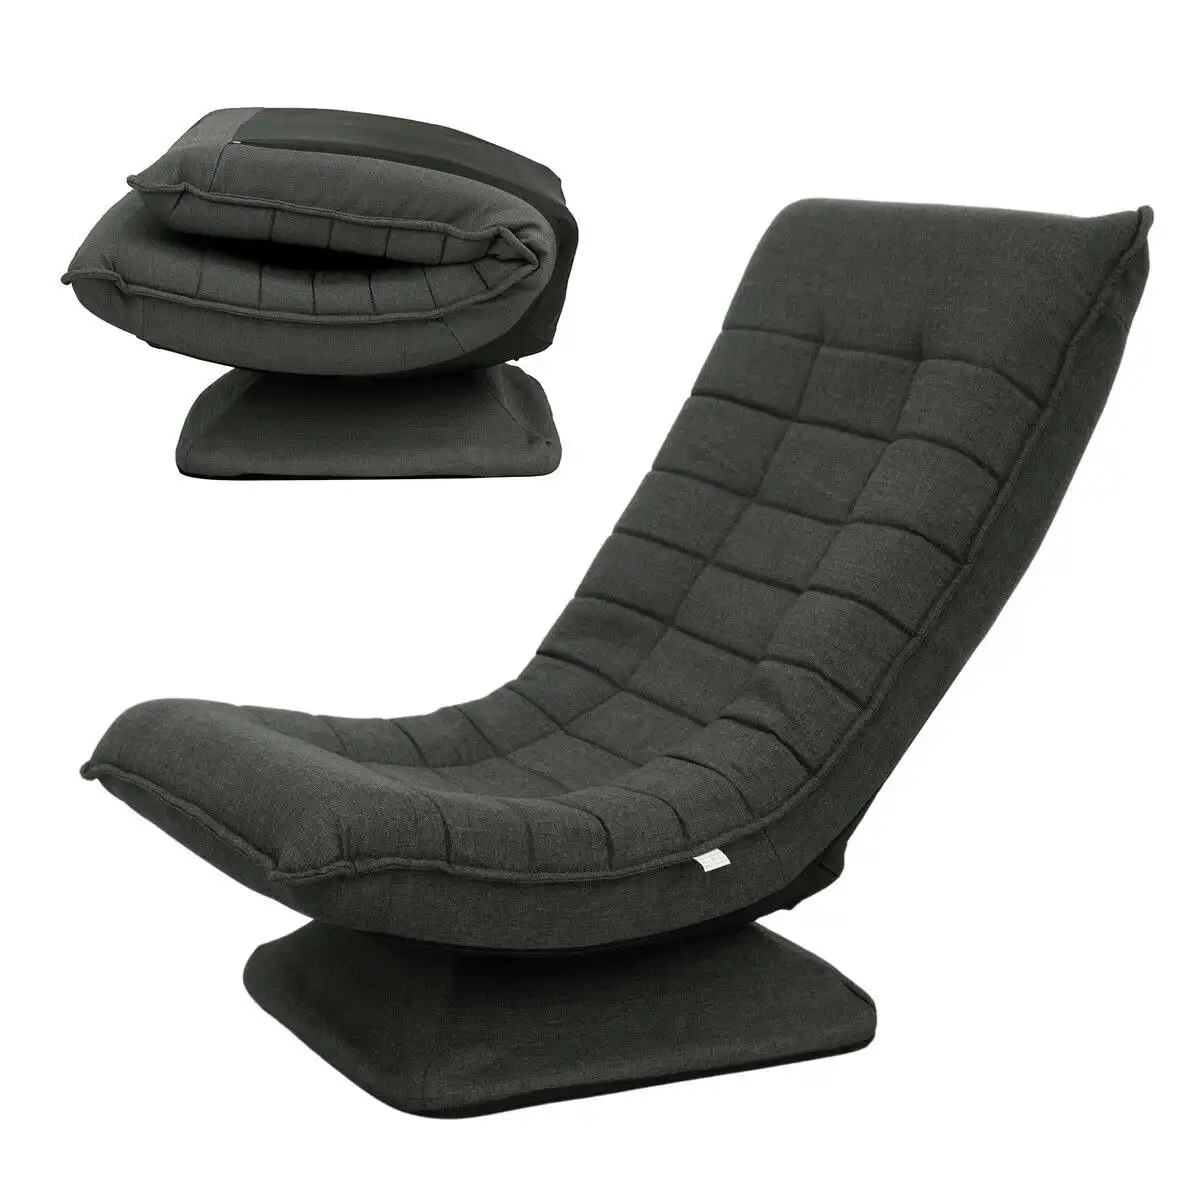 Ausway Floor Sofa Bed Chair Couch Lounge Recliner Folding 360 Degree Swivel Lazy Lounger Adjustable Chaise Ground Seat